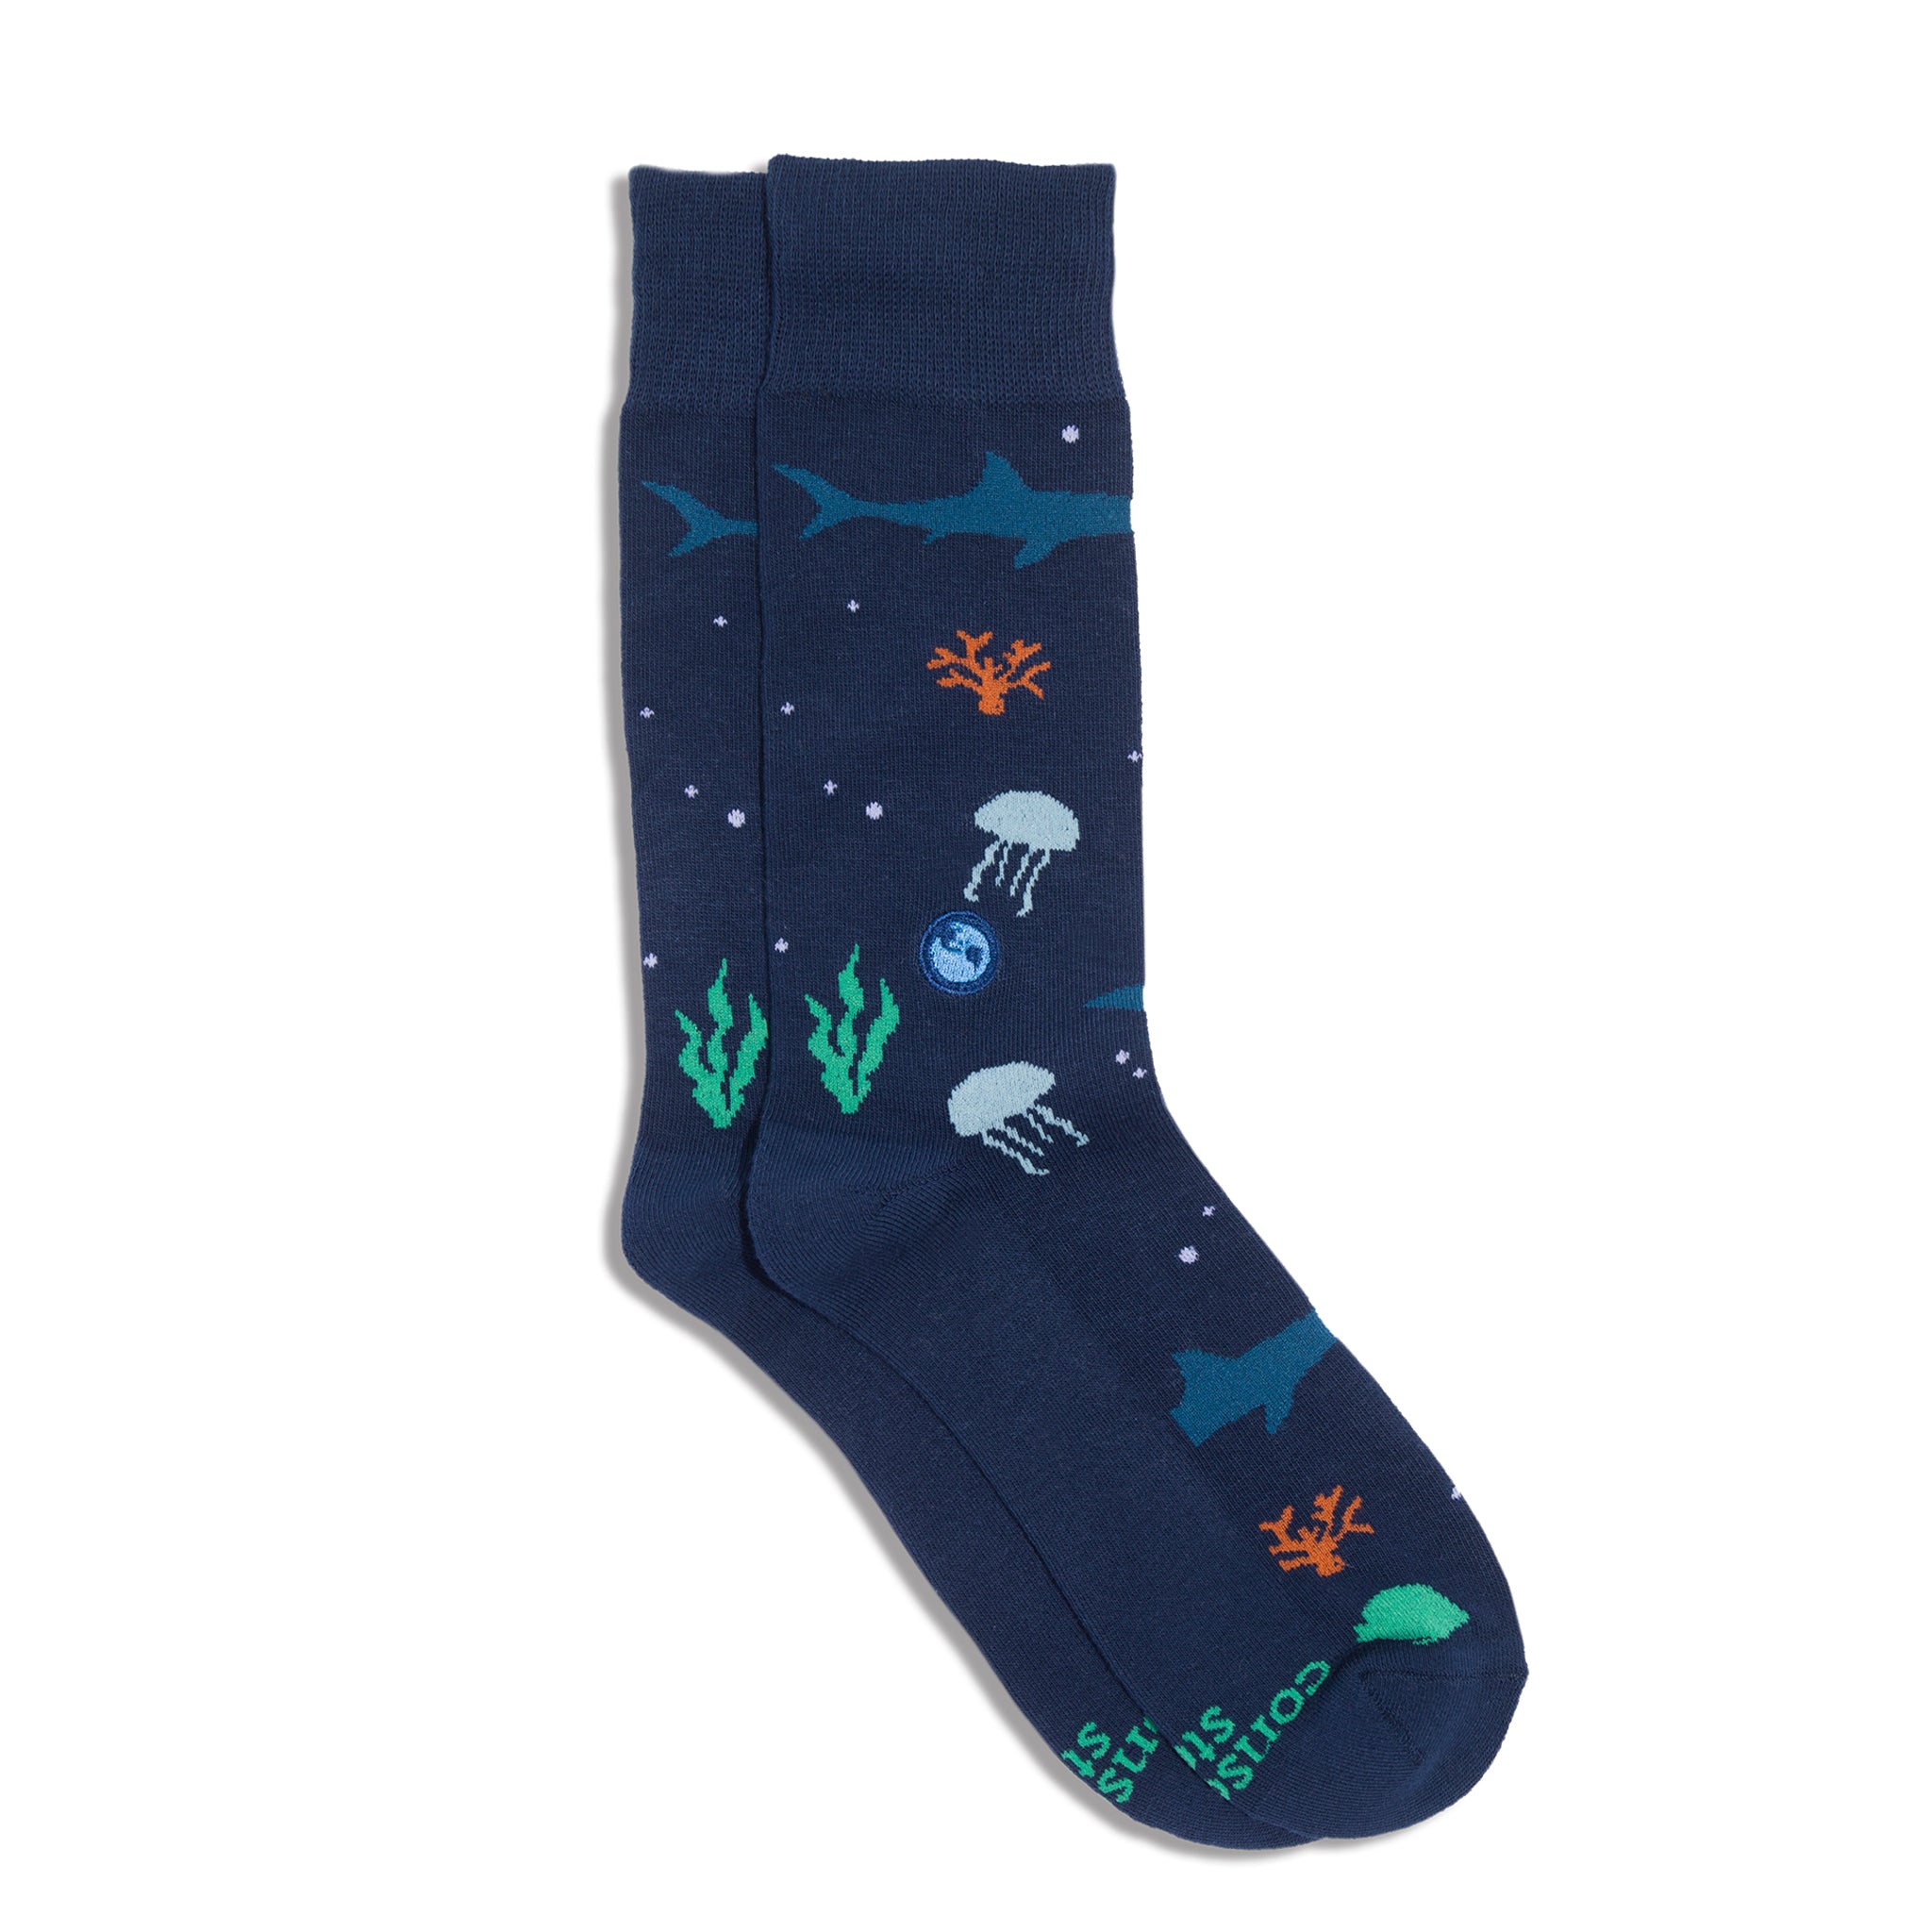 Image of Socks that Protect Our Planet